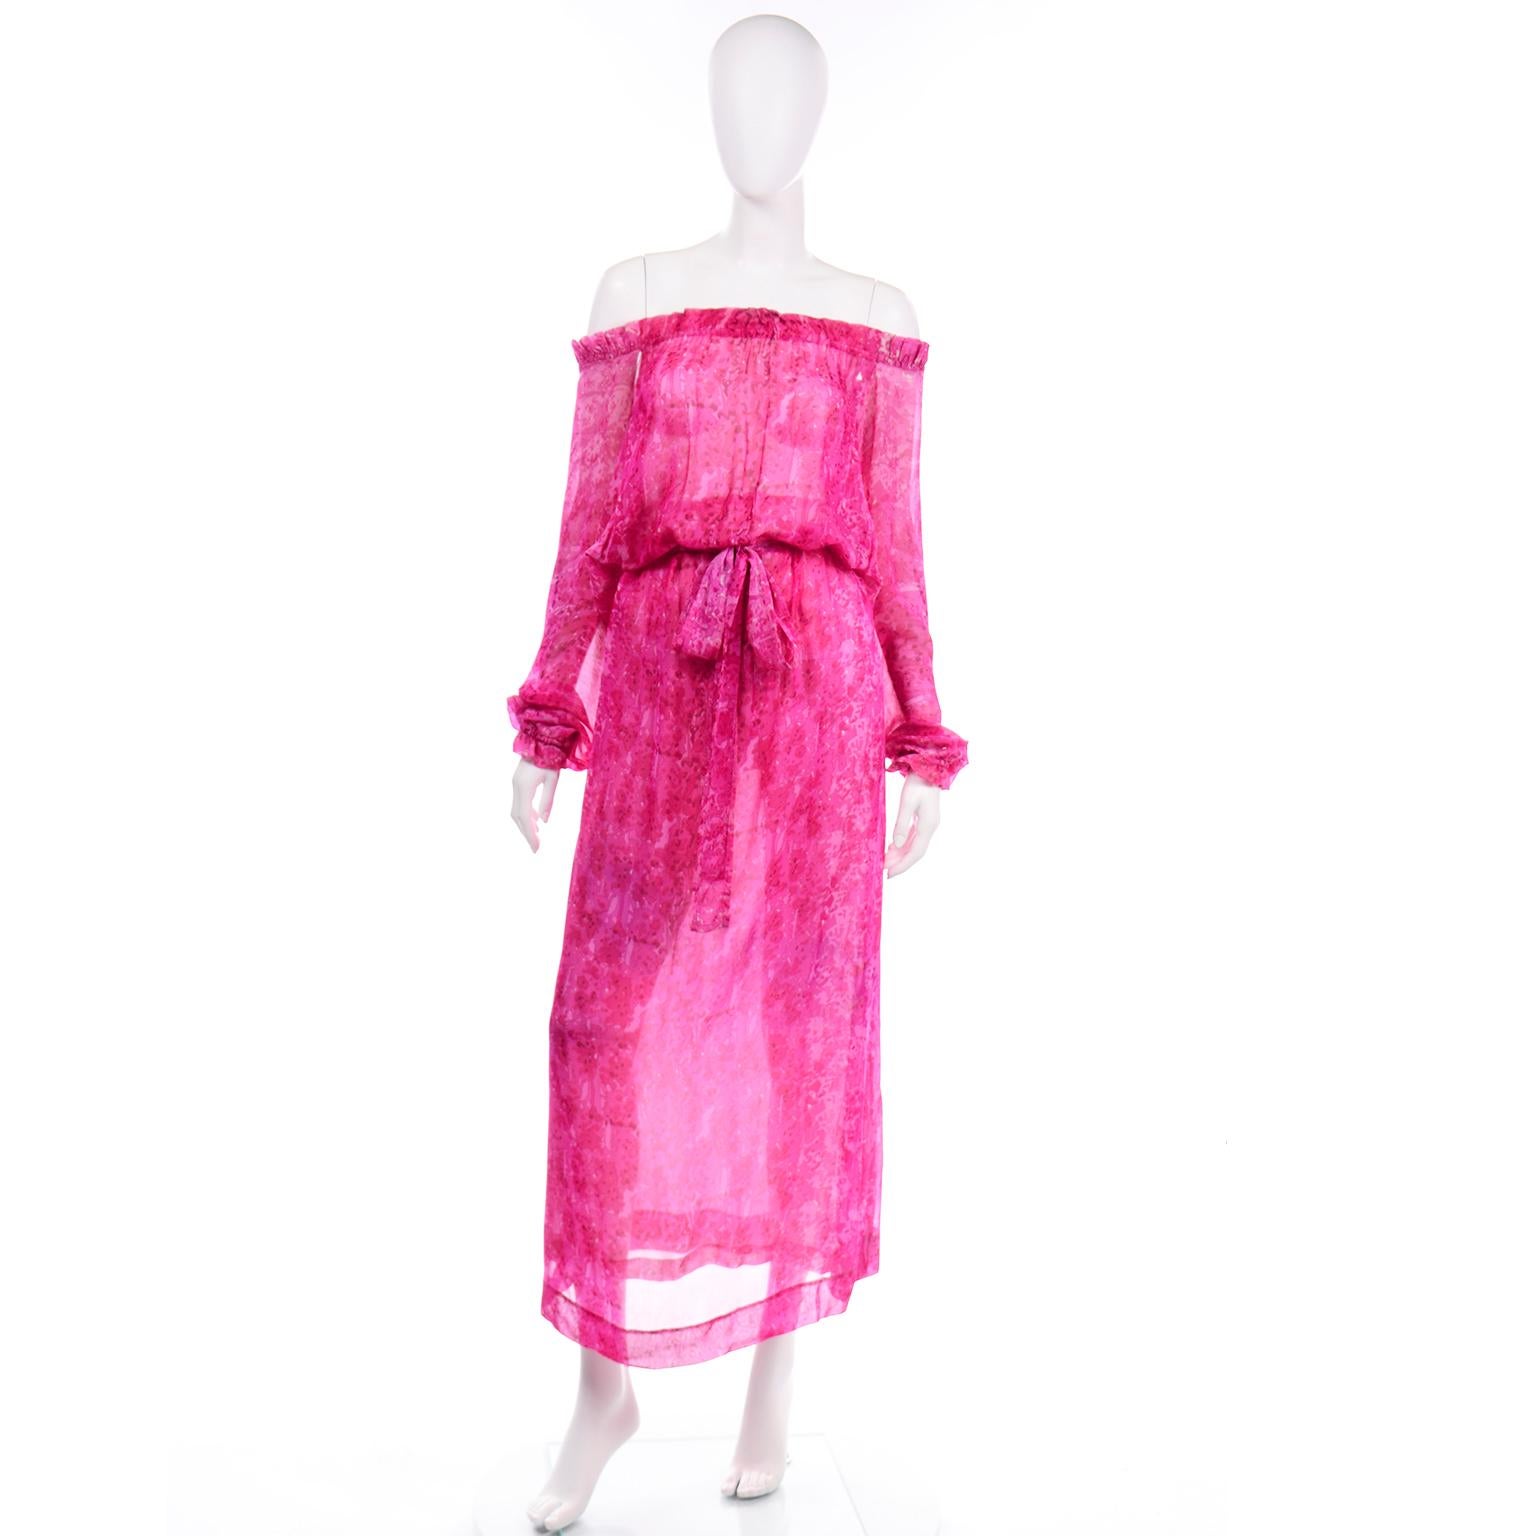 This rare 1970's Givenchy vintage pink print tissue silk dress is truly stunning! The dress has a high neck (or it can be worn off the shoulders as shown), and the back is completely open to the waist with a beautiful ruffled trim. This ethereal